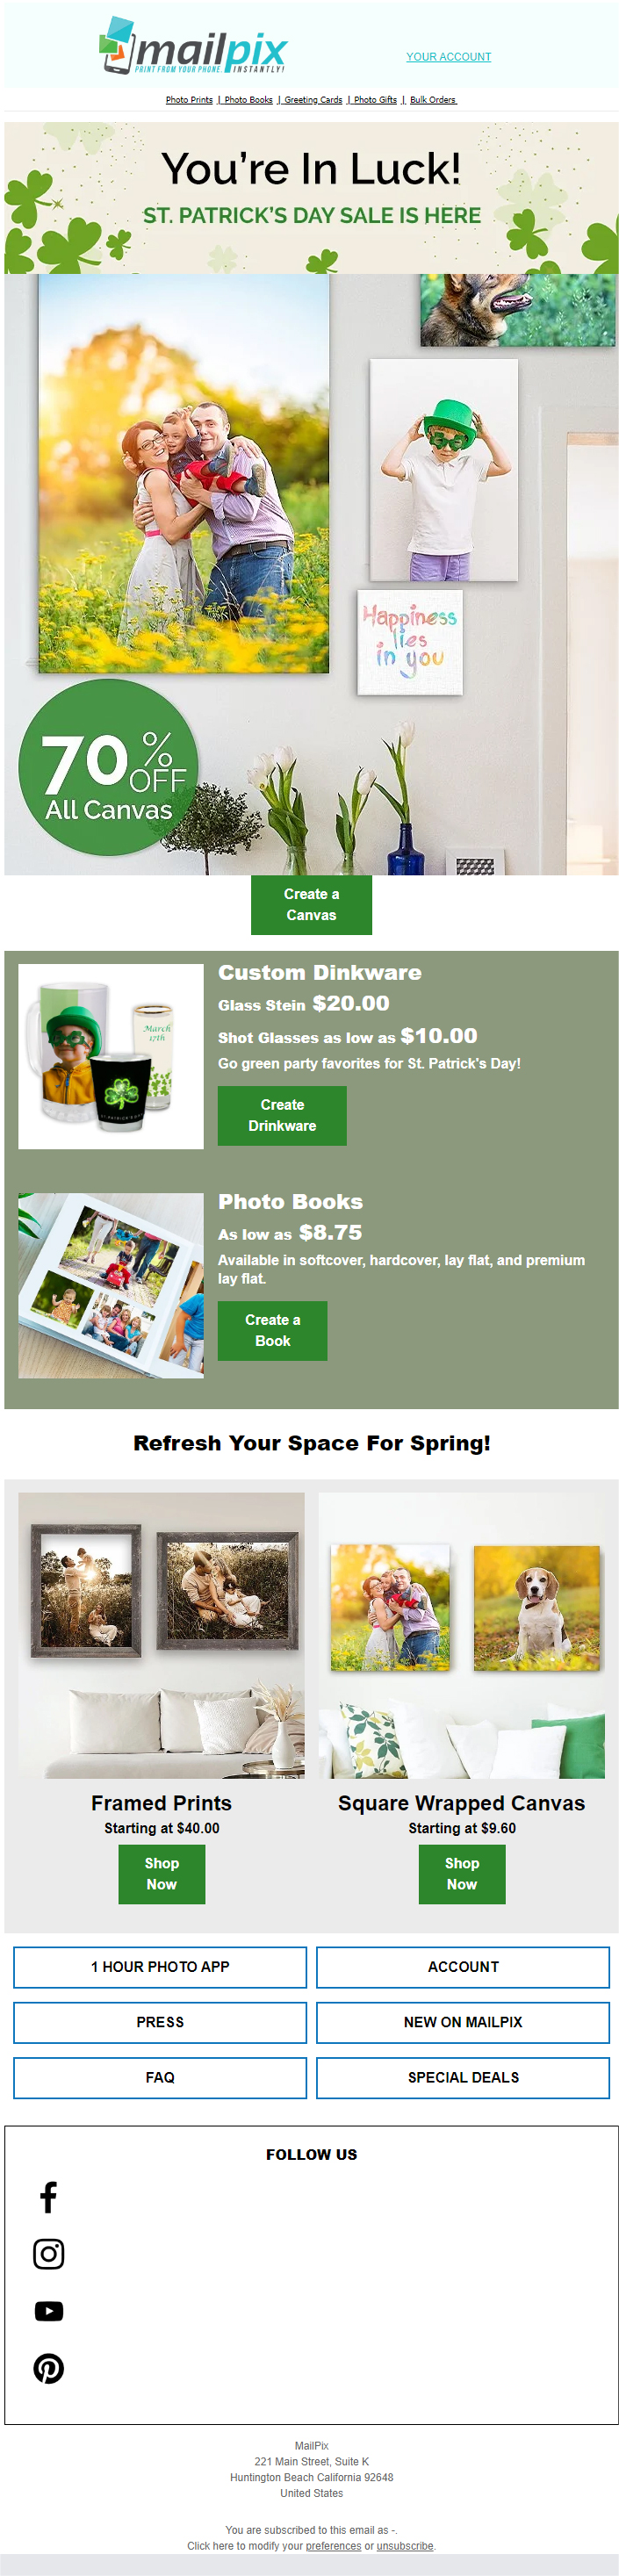 MailPix- St. Paddy’s Day email